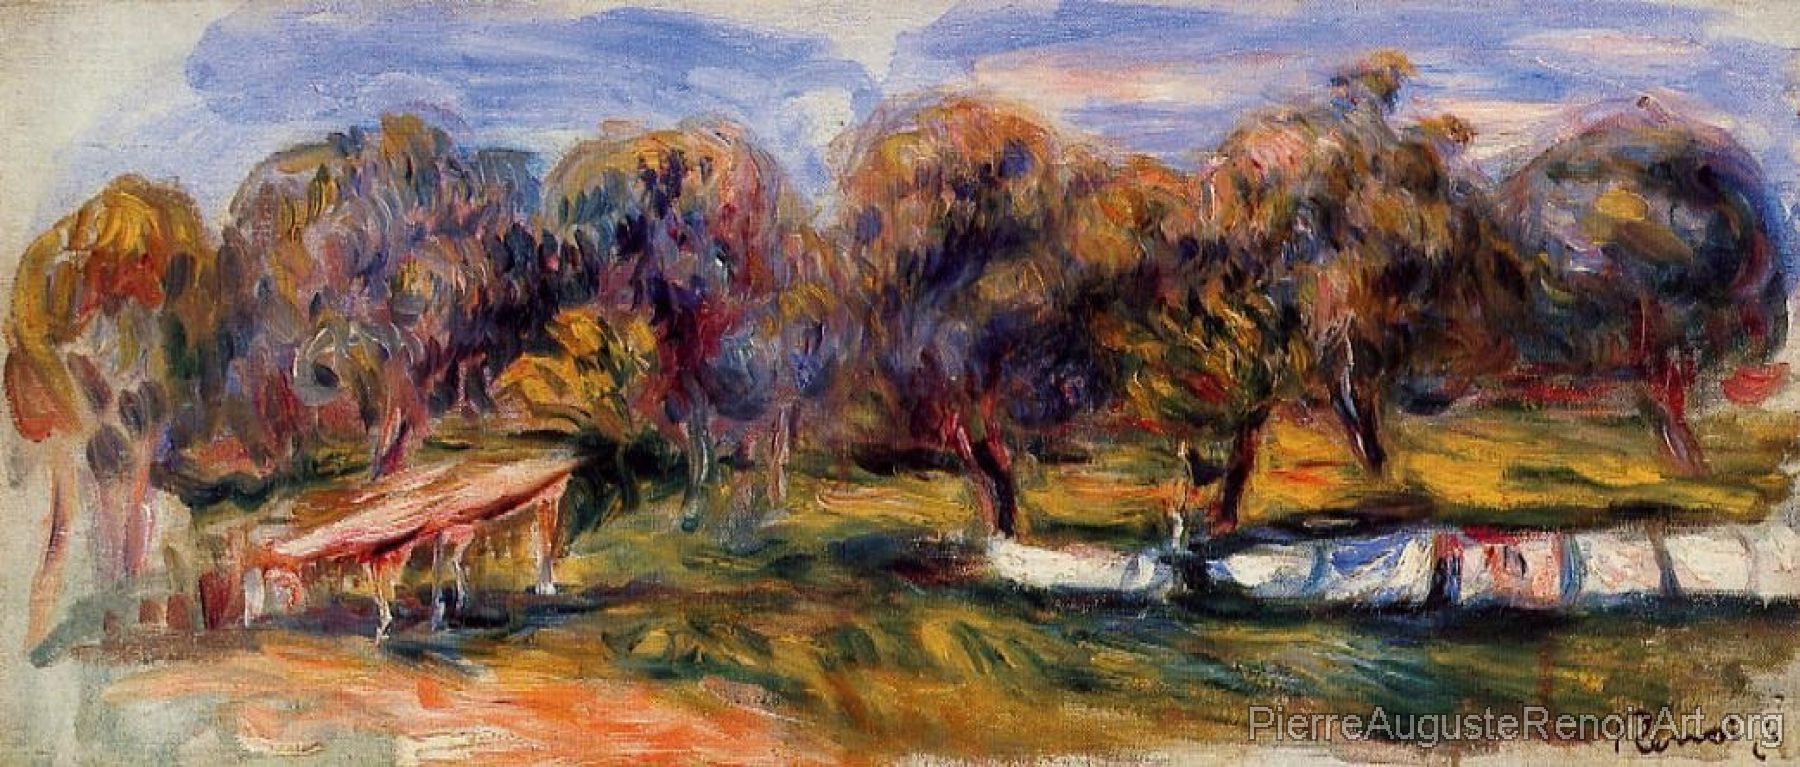 Landscape with Orchard